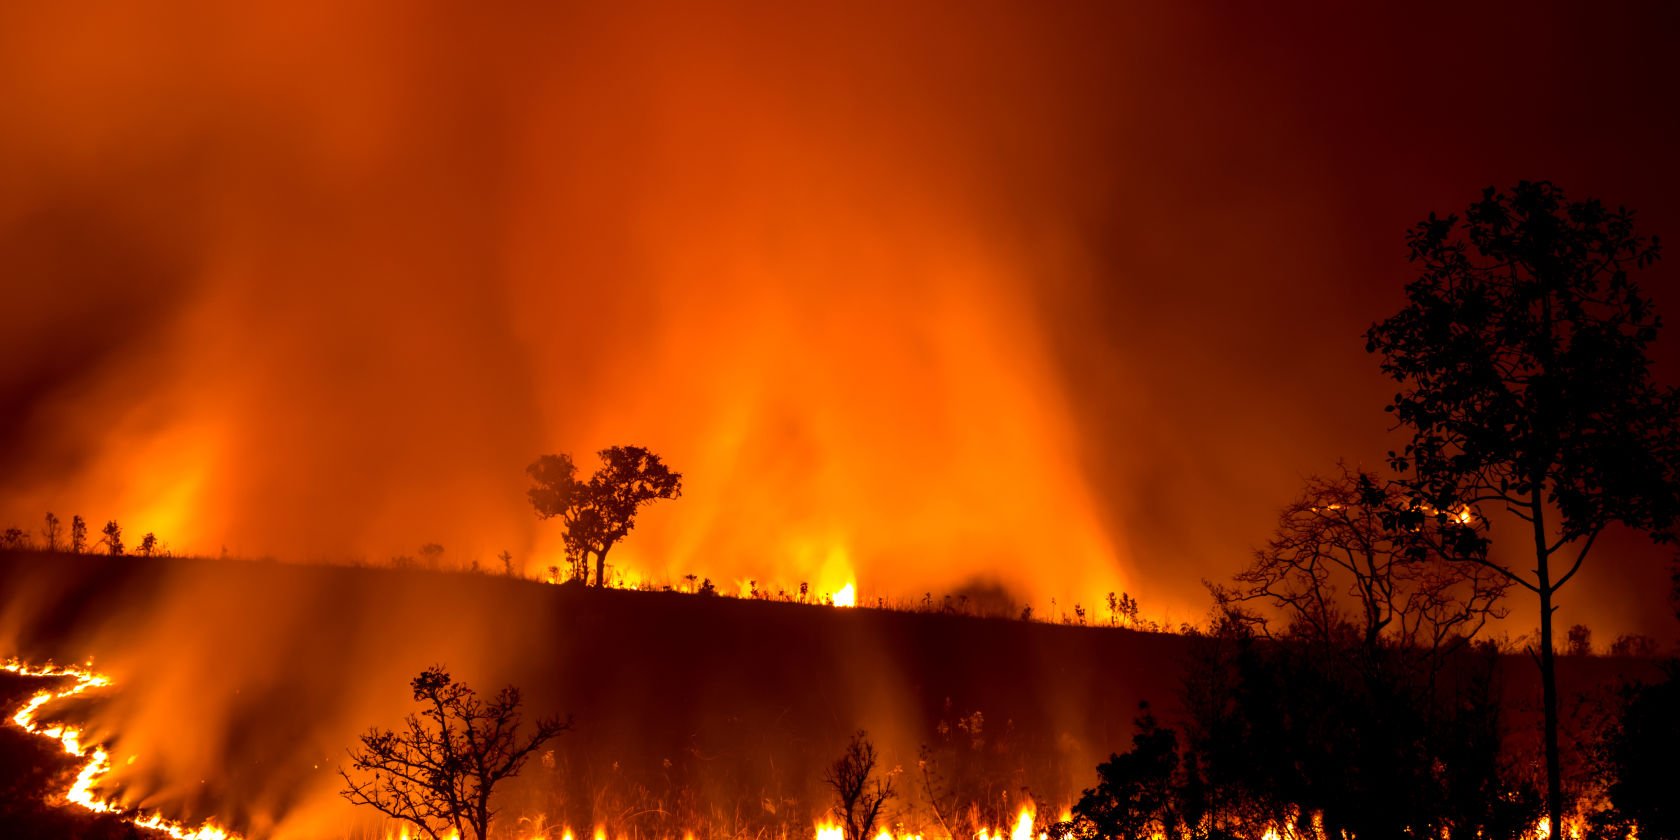 Homeowners urged to act now to protect their home ahead of El Niño bushfires this summer